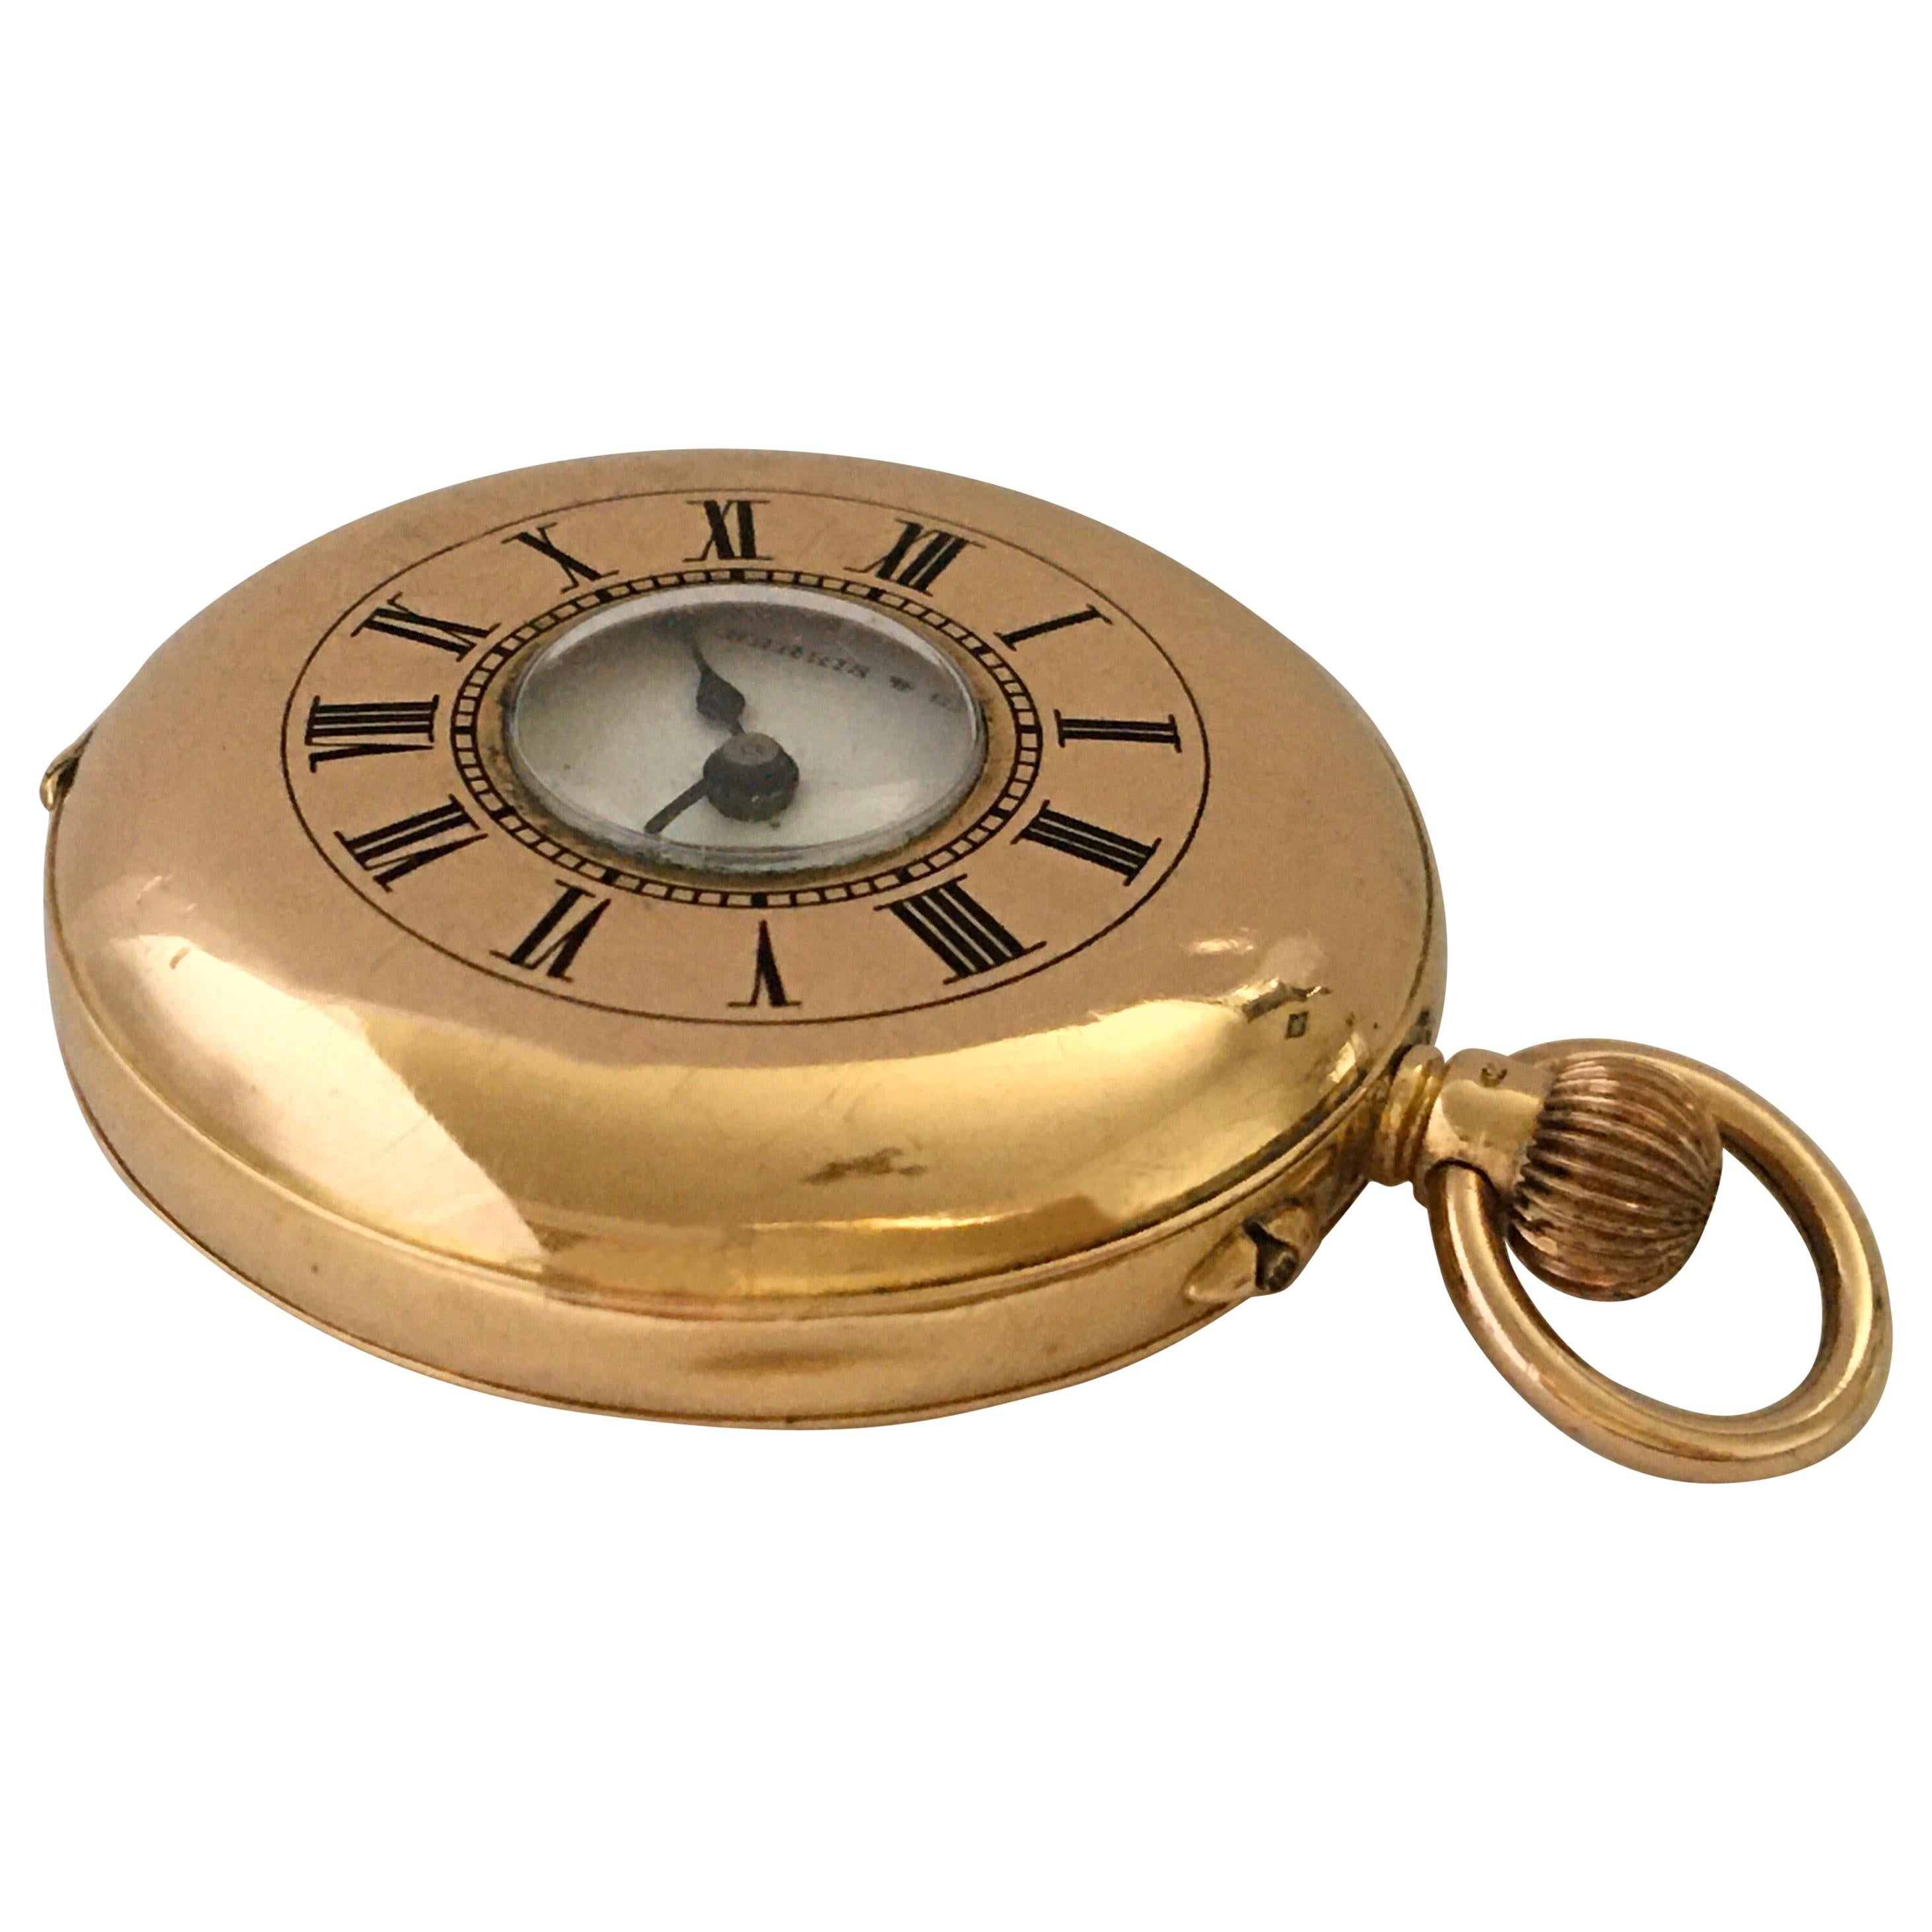 Antique 18k Gold Half Hunter Hand-winding Pocket Watch Signed Harris & Co.


This 40mm diameter watch is in good working condition and it is running well. Visible signs of ageing and wear with tiny light dents on the gold watch cases shown. the dust